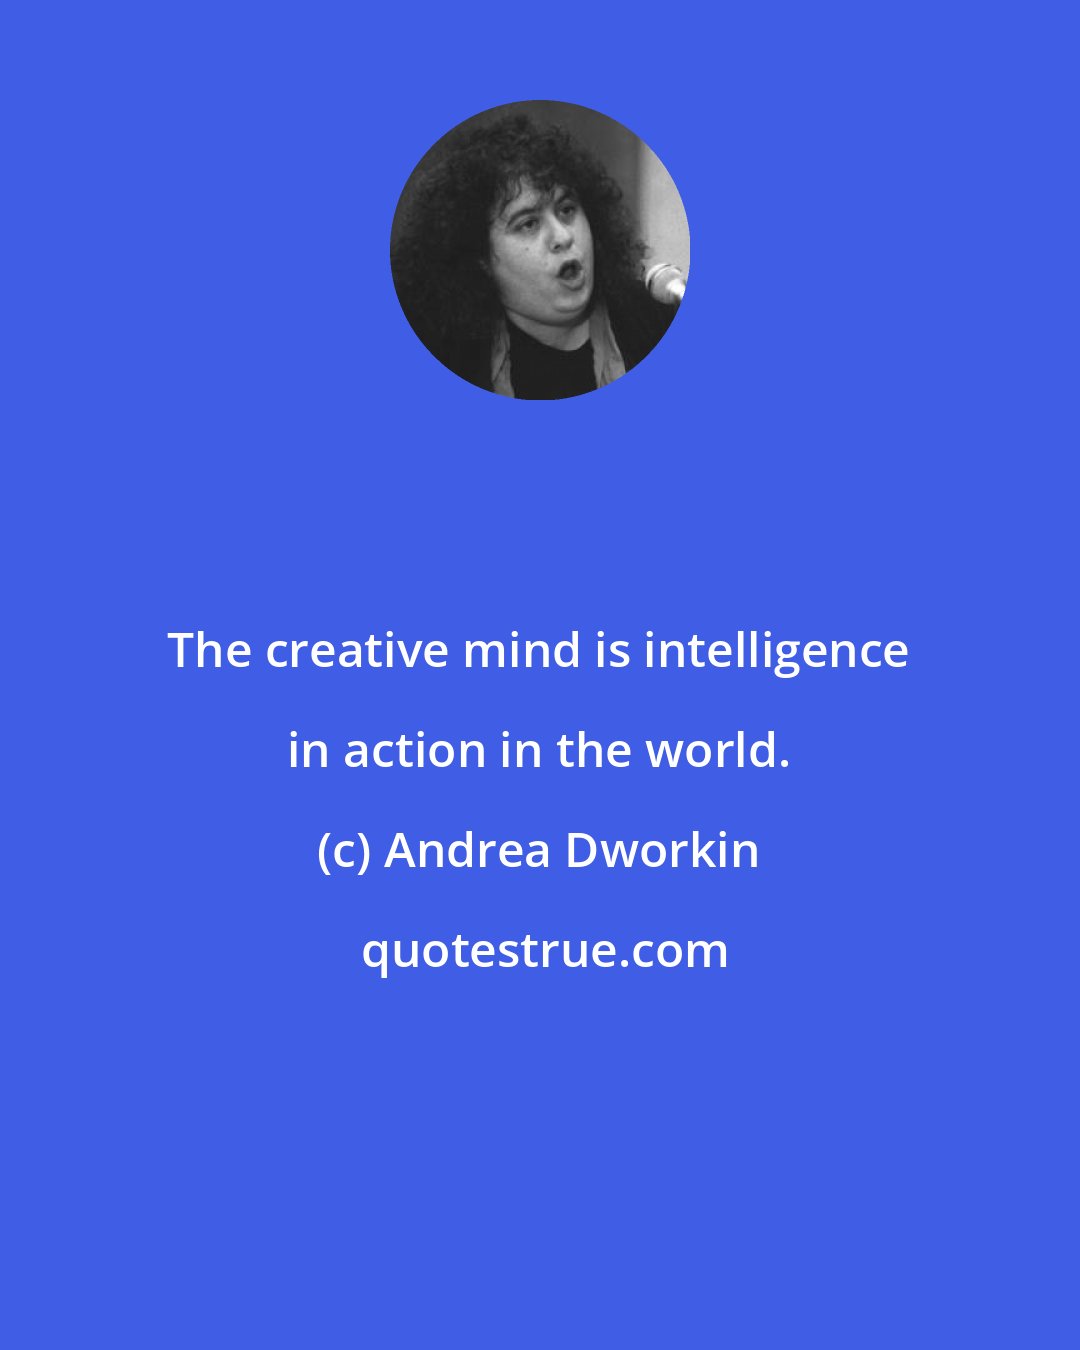 Andrea Dworkin: The creative mind is intelligence in action in the world.